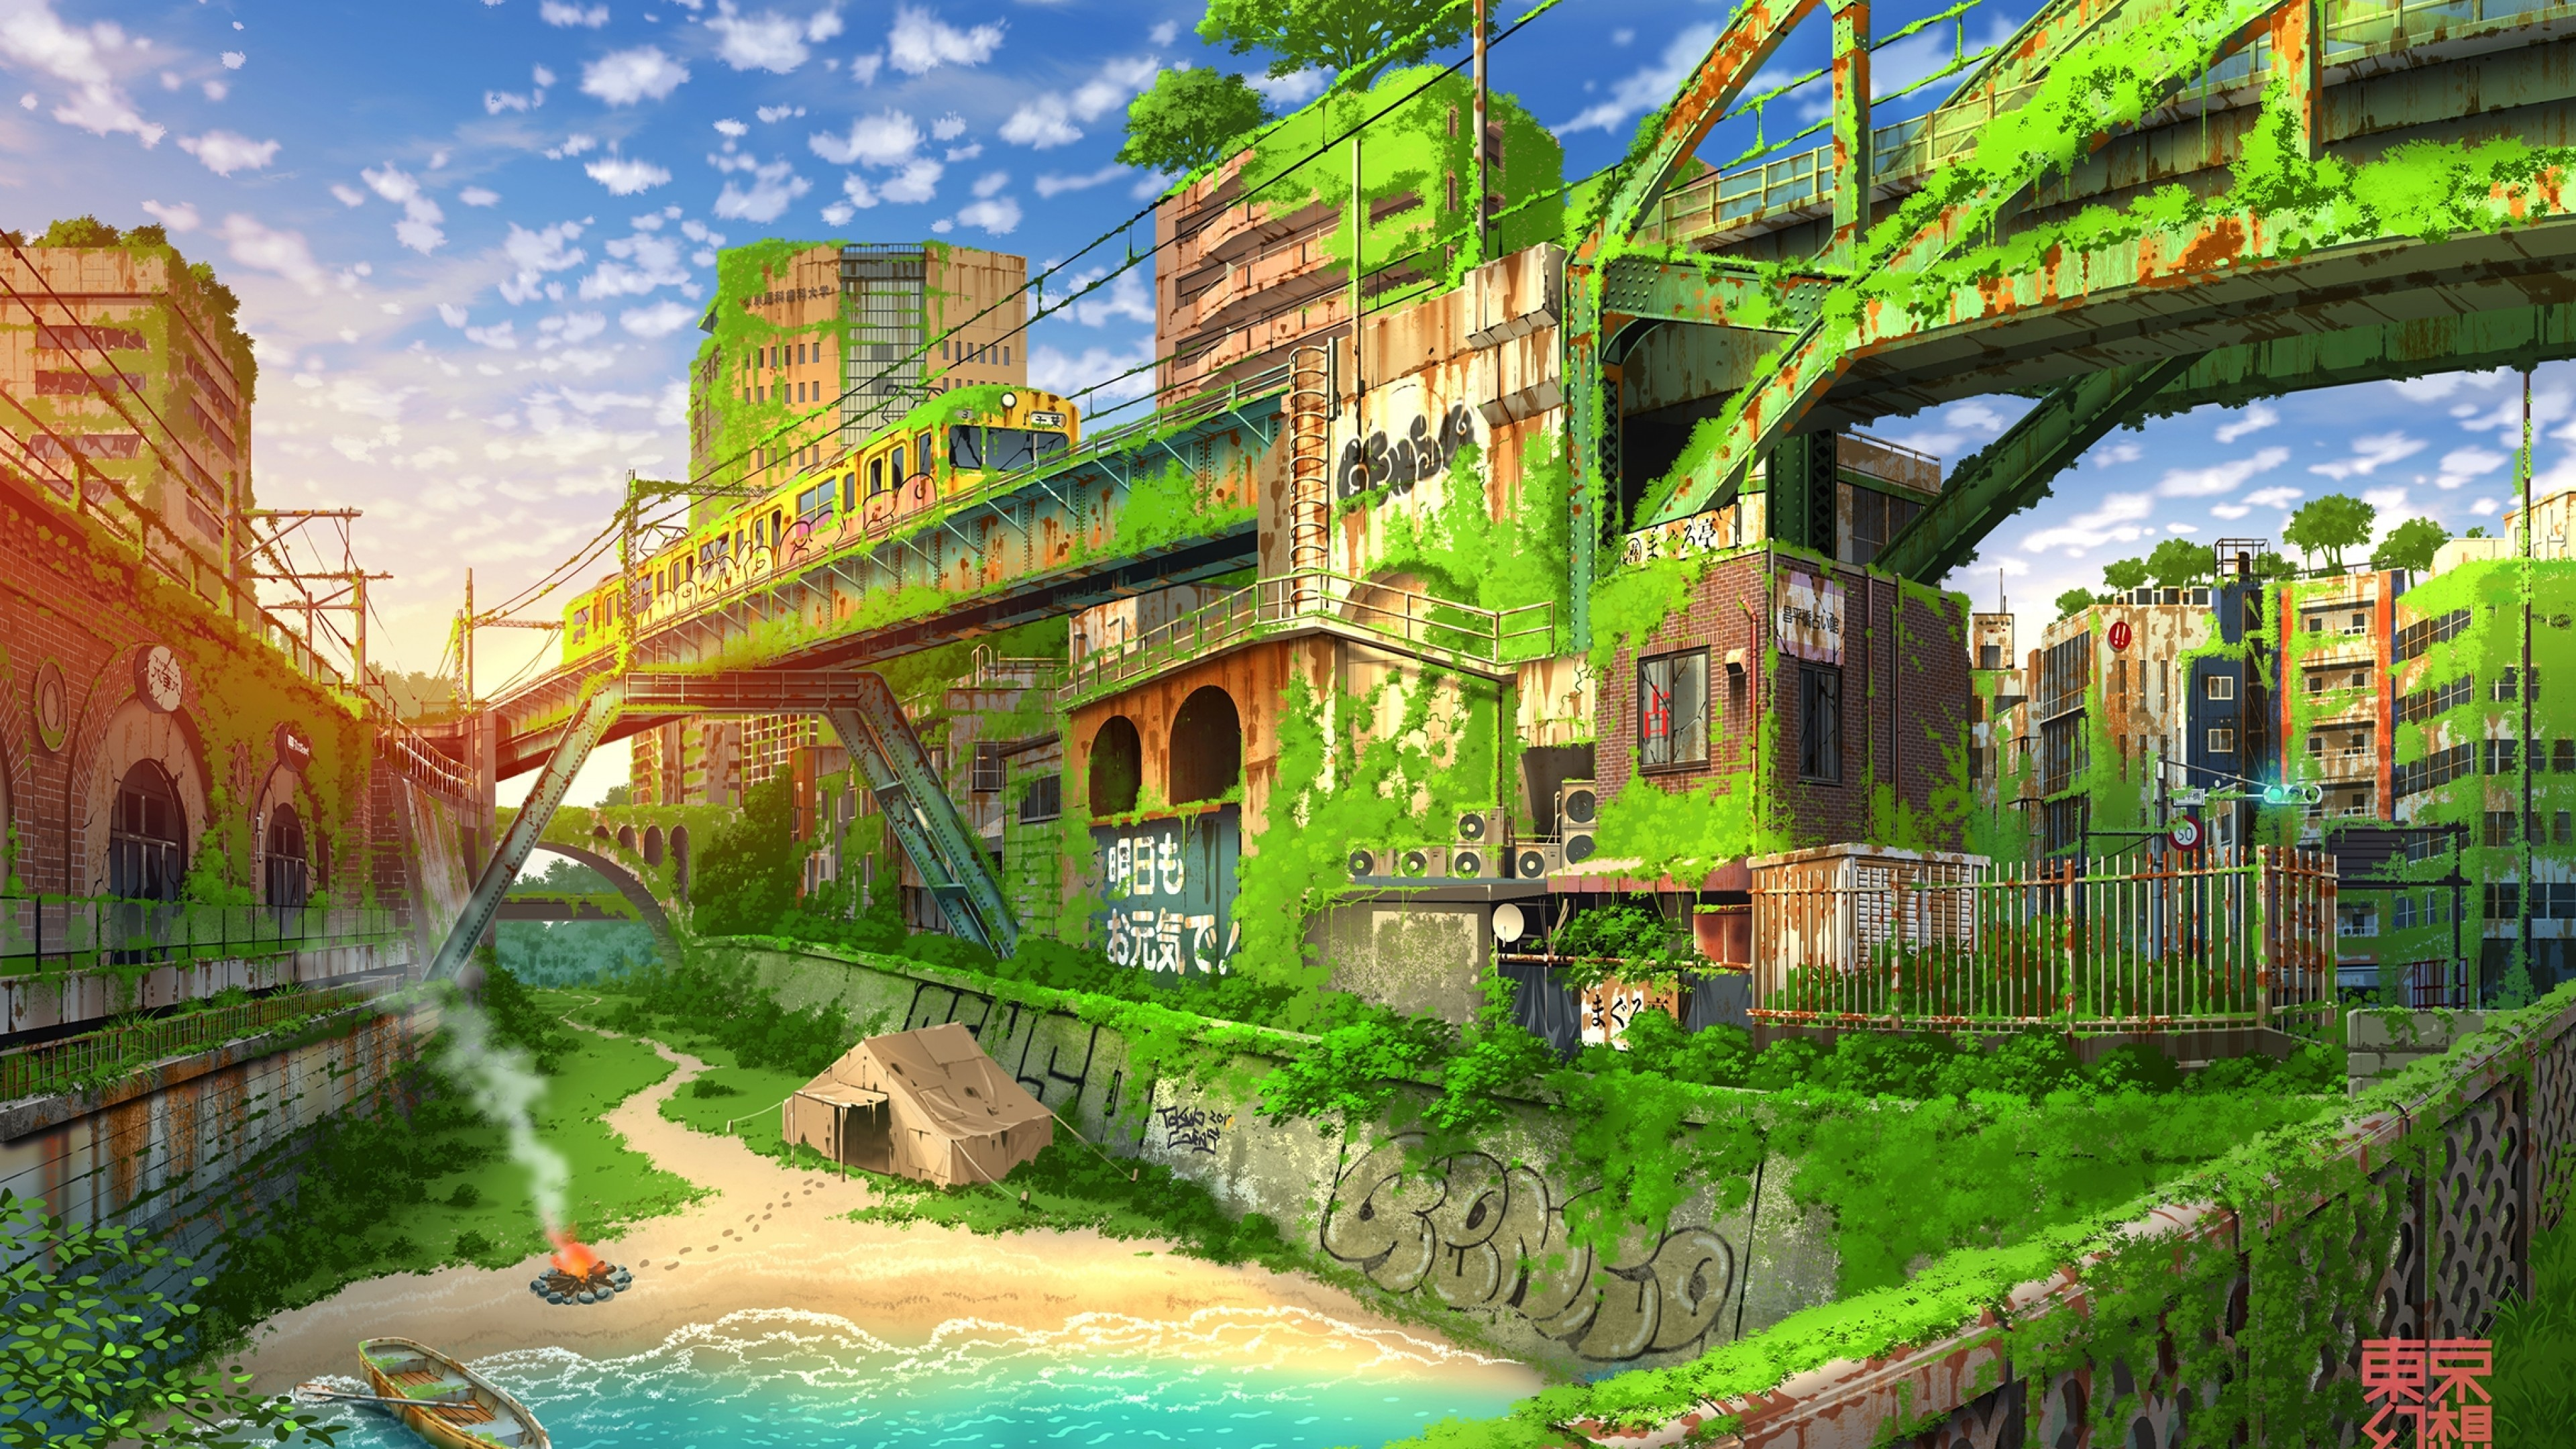 Anime 3840x2160 anime Paisaje Soulworker anime city water fire boat sunset glow